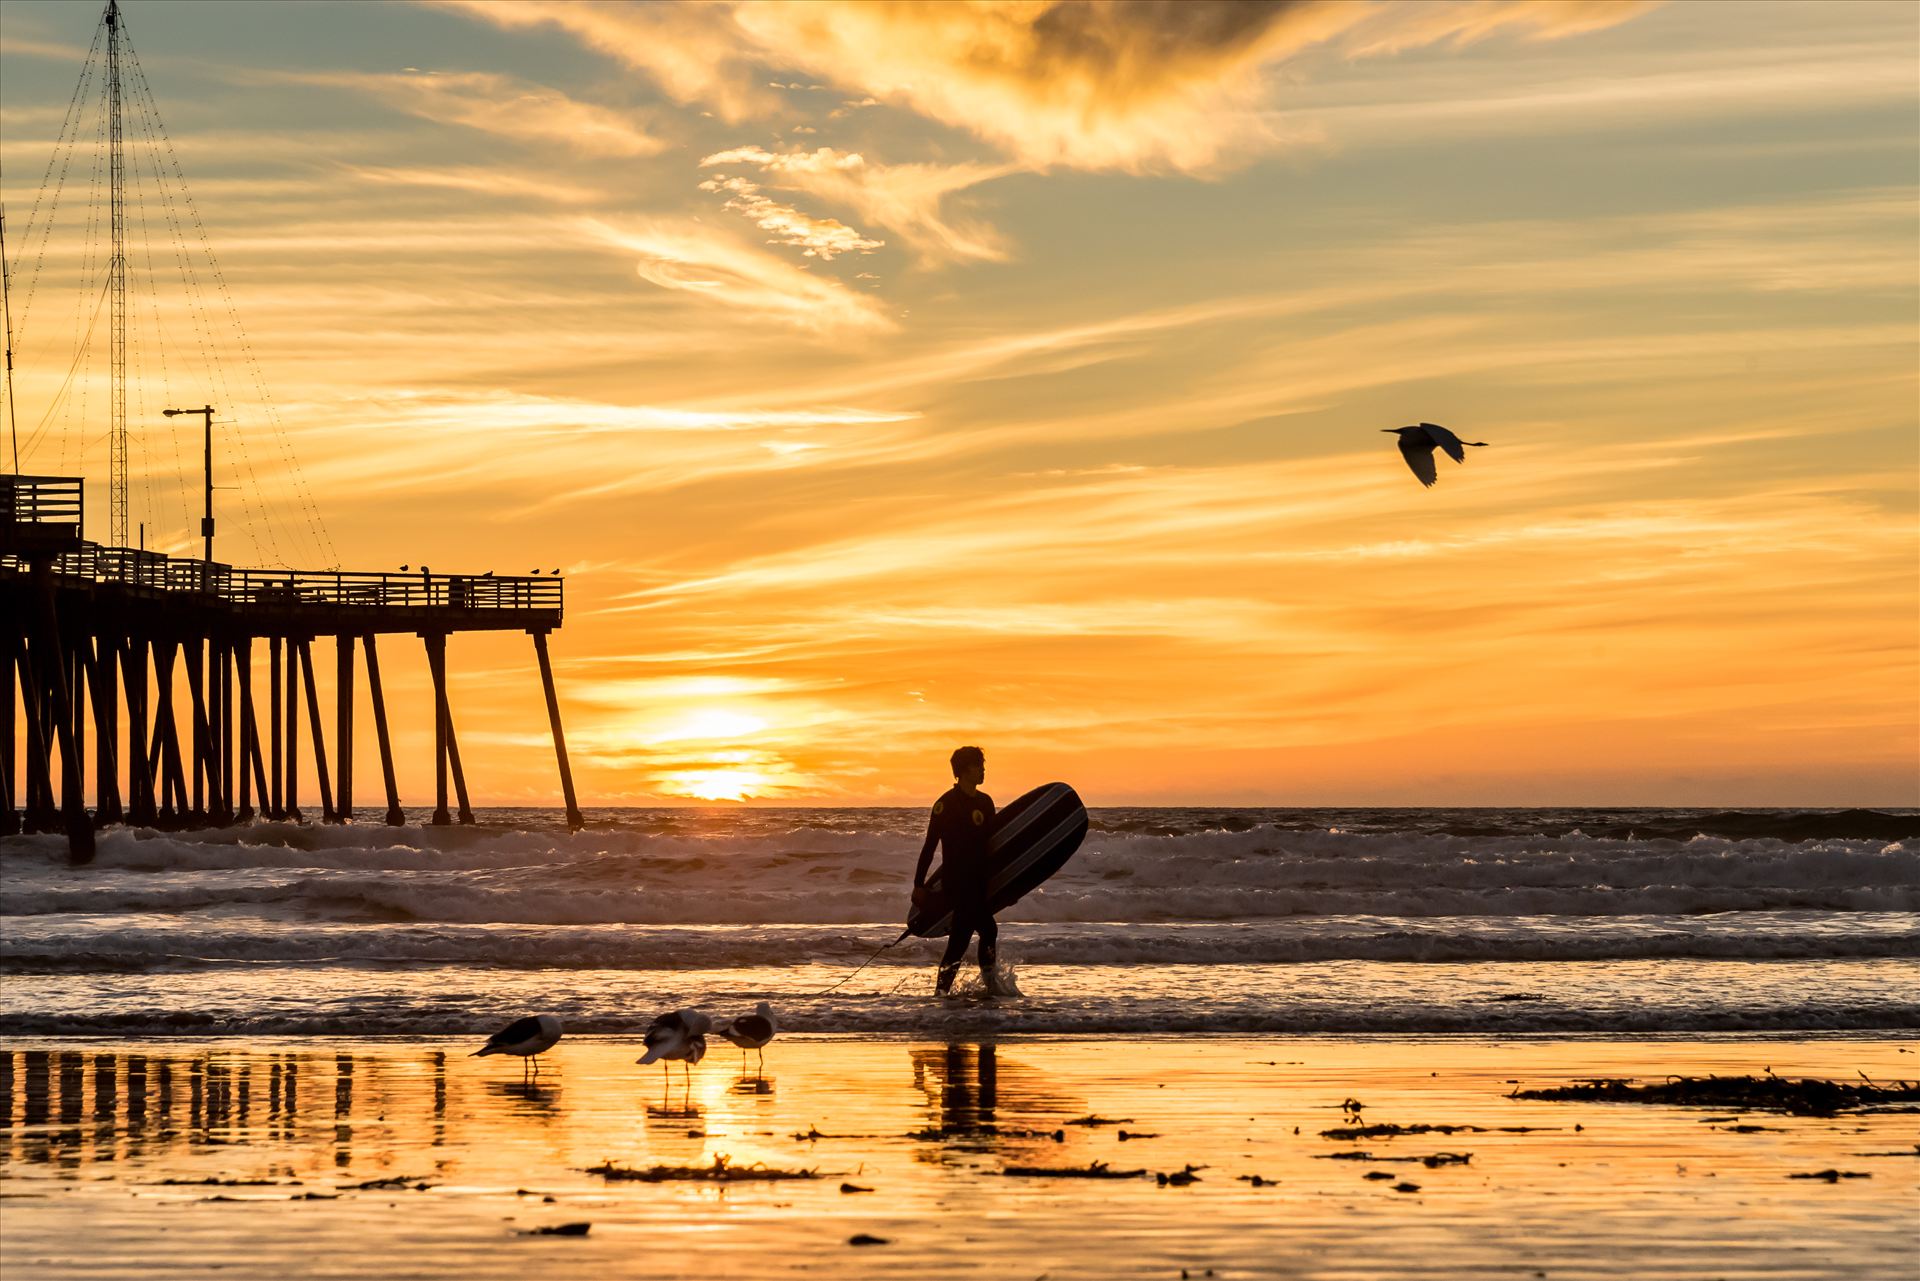 Sunset Surfing and a Flying Bird.jpg -  by Sarah Williams